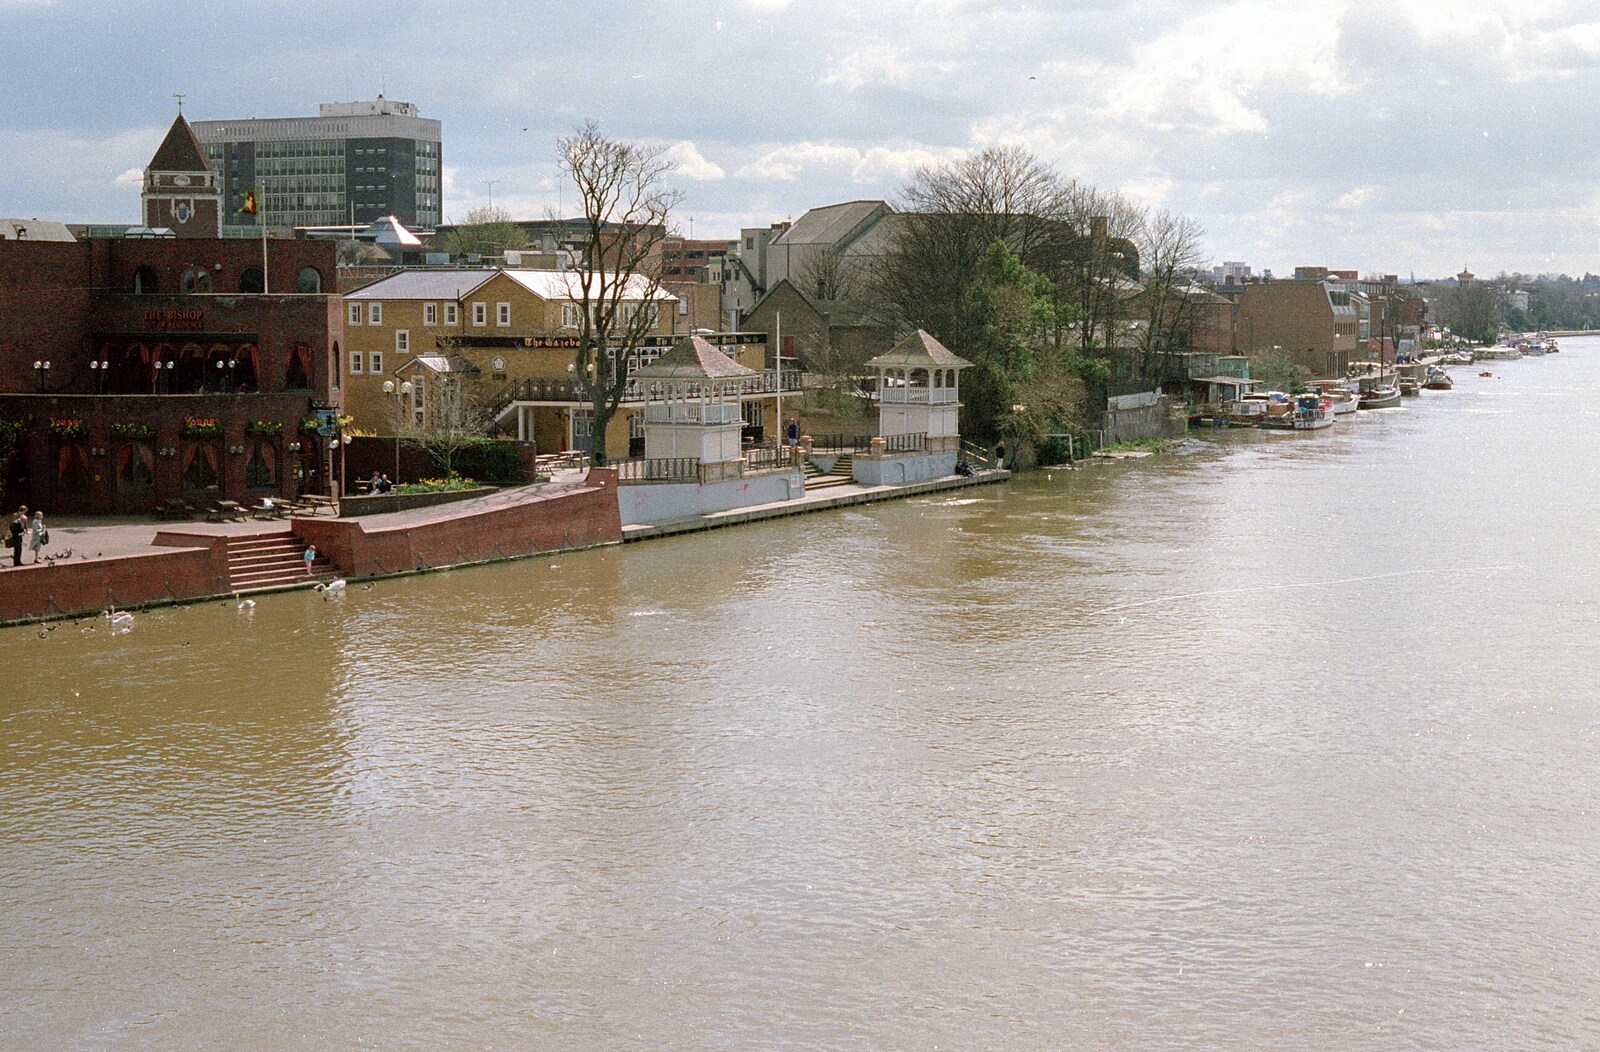 A view up the River Thames from Trotsky's Birthday, New Malden, Kingston Upon Thames - 20th April 1986